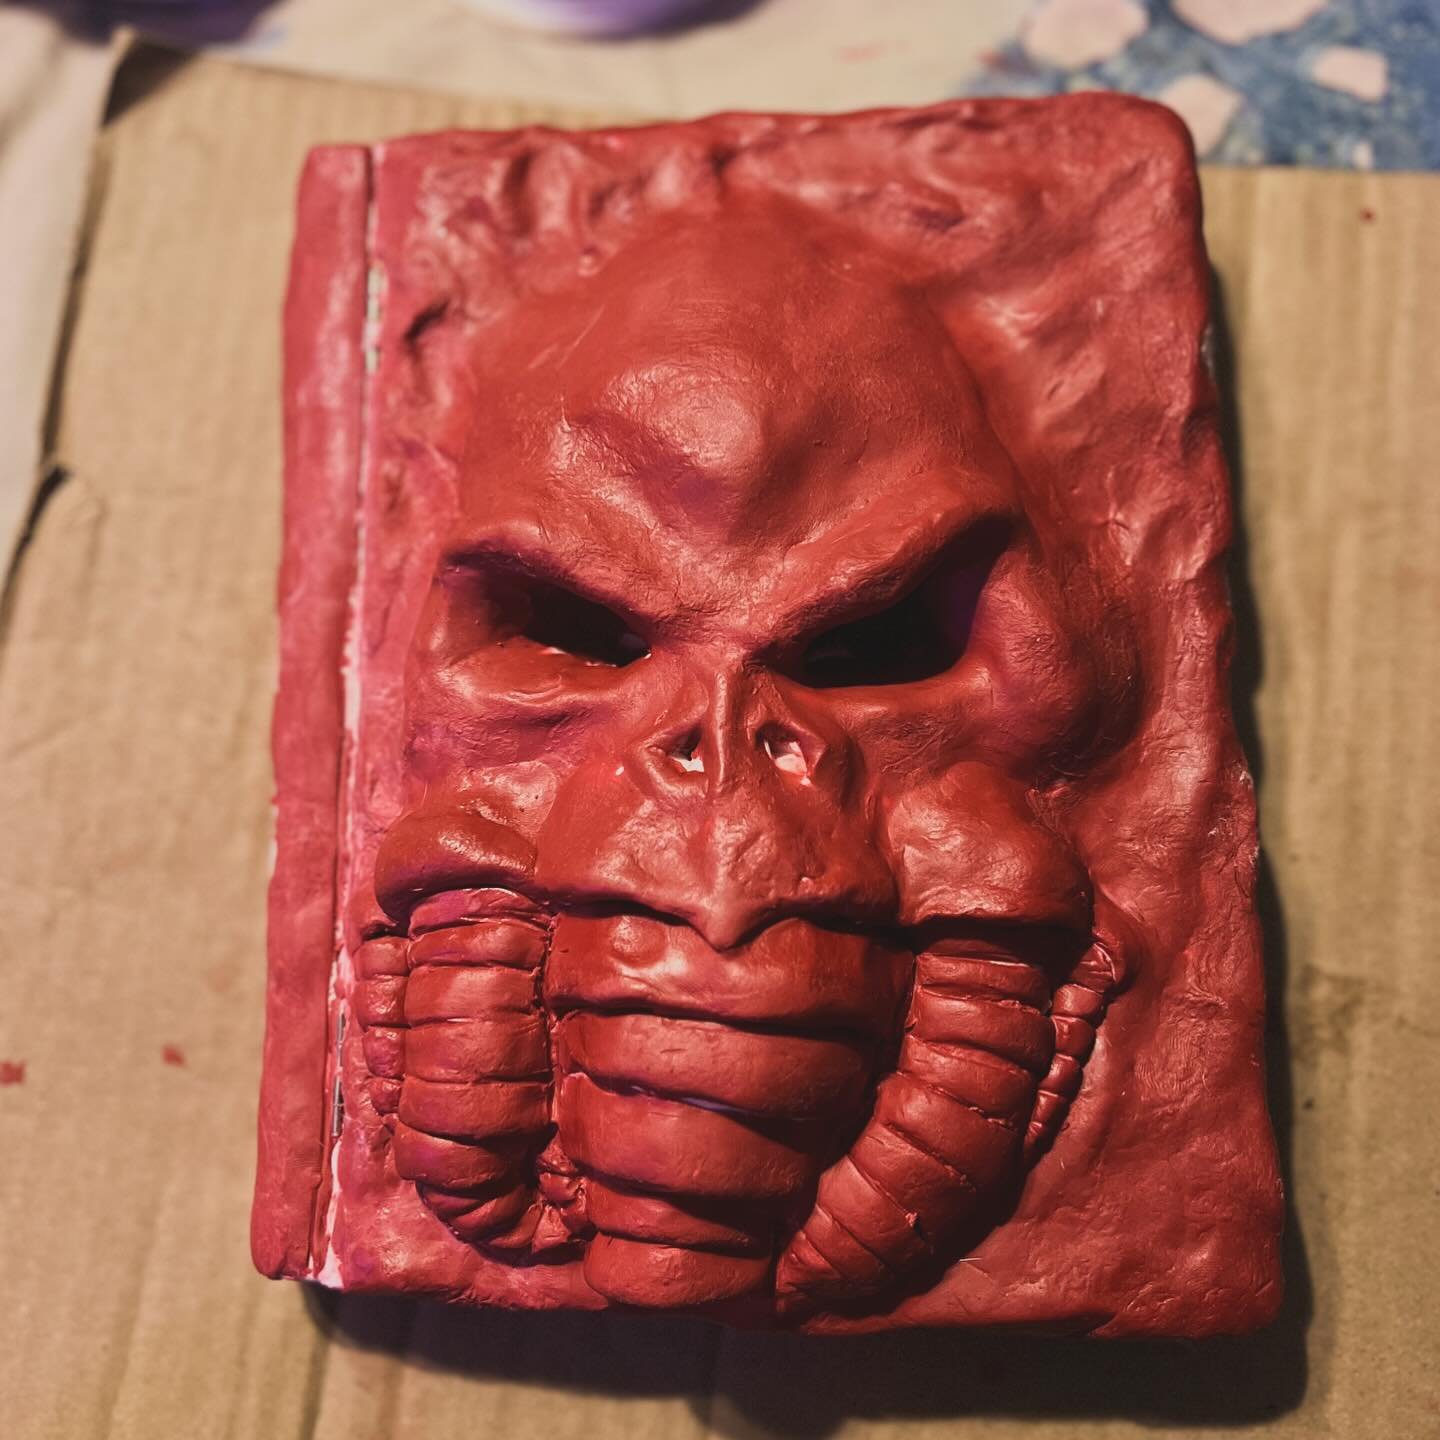 Got the initial layer of hardclay onto the cover of the Necronomicon! 
.
.
#horror #horrorartist #horrorcommunity #horrorart #propmaking #dndfanart #dungeonsanddragons #prop #propmaking #propmaker #warhammercommunity #horrorcommunity #sculptor #sculp